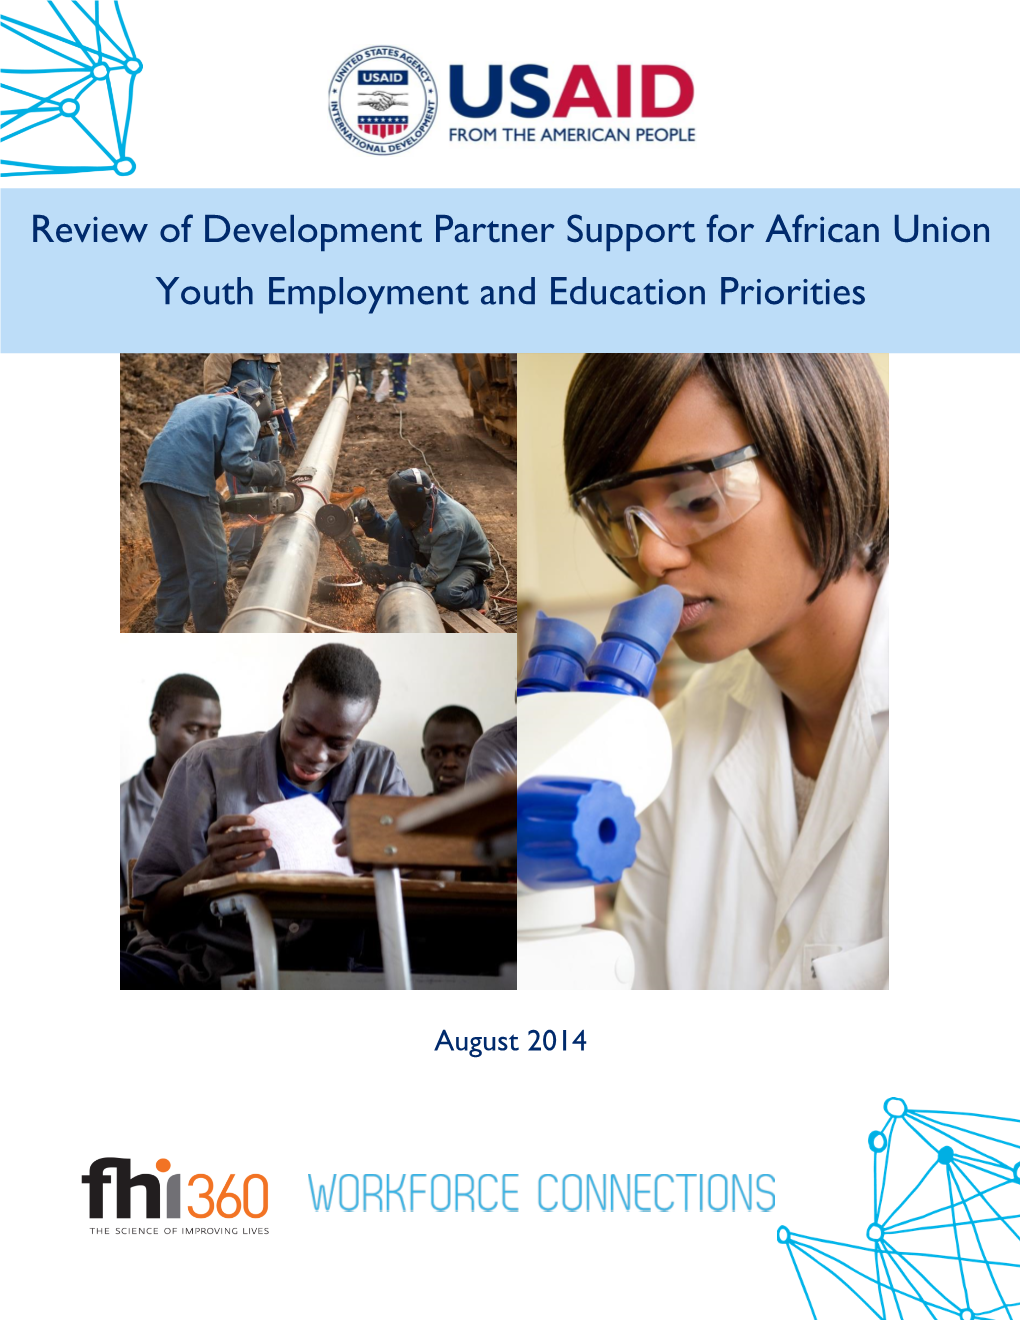 Review of Development Partner Support for African Union Youth Employment and Education Priorities